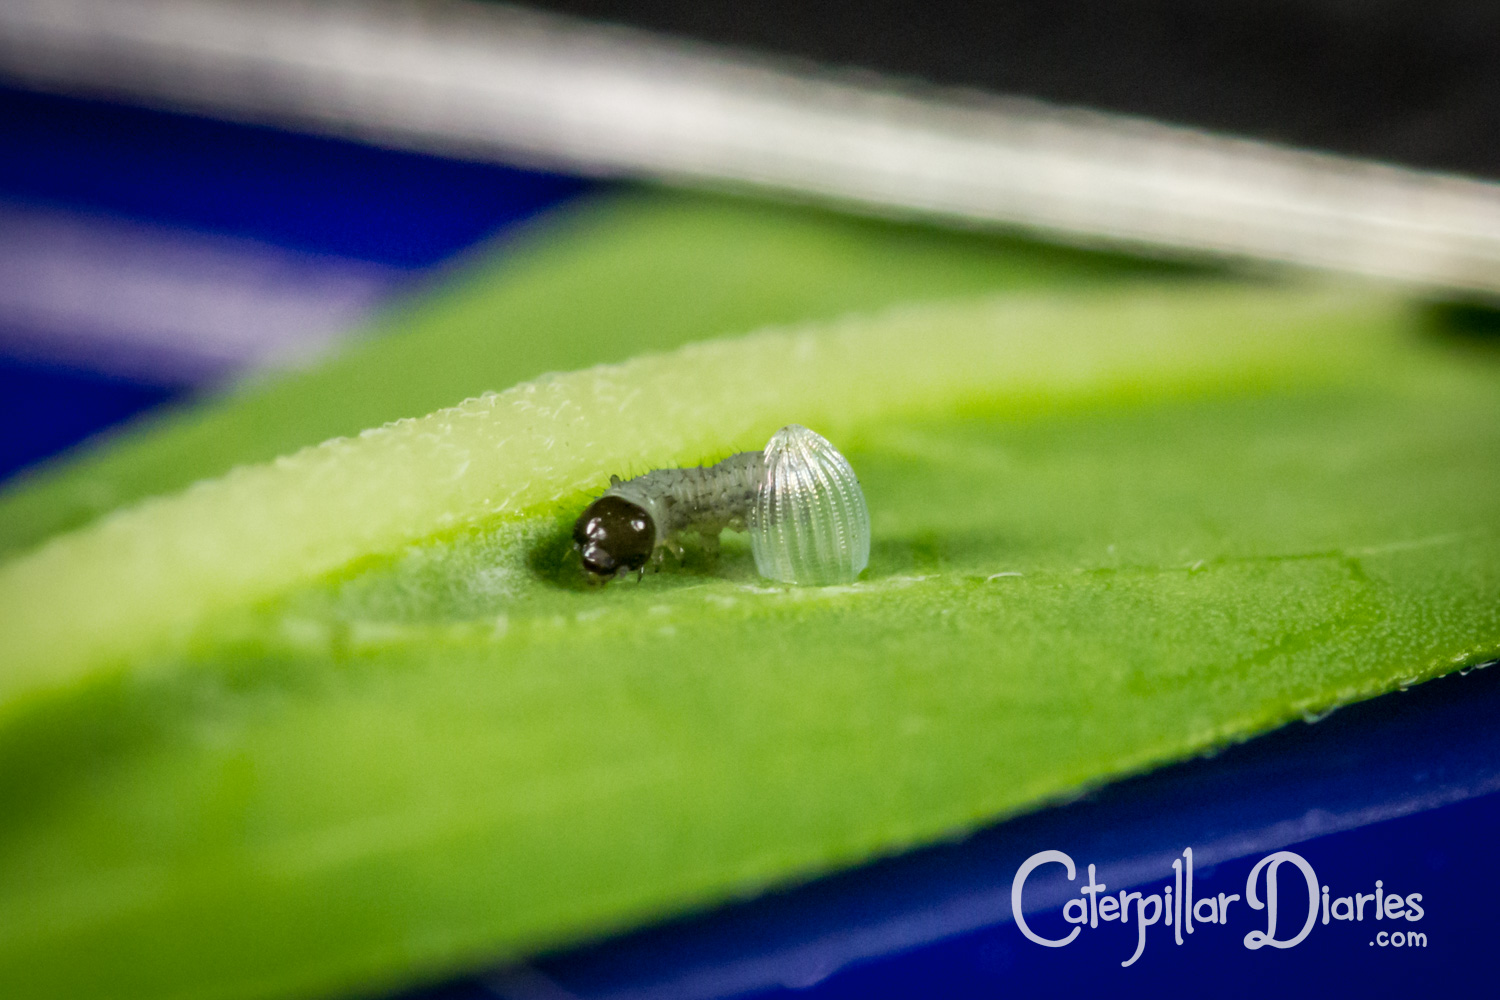 A tiny caterpillar of the monarch butterfly hatching from its egg on a leaf, with a black head and a hair- (setae) covered grey body.